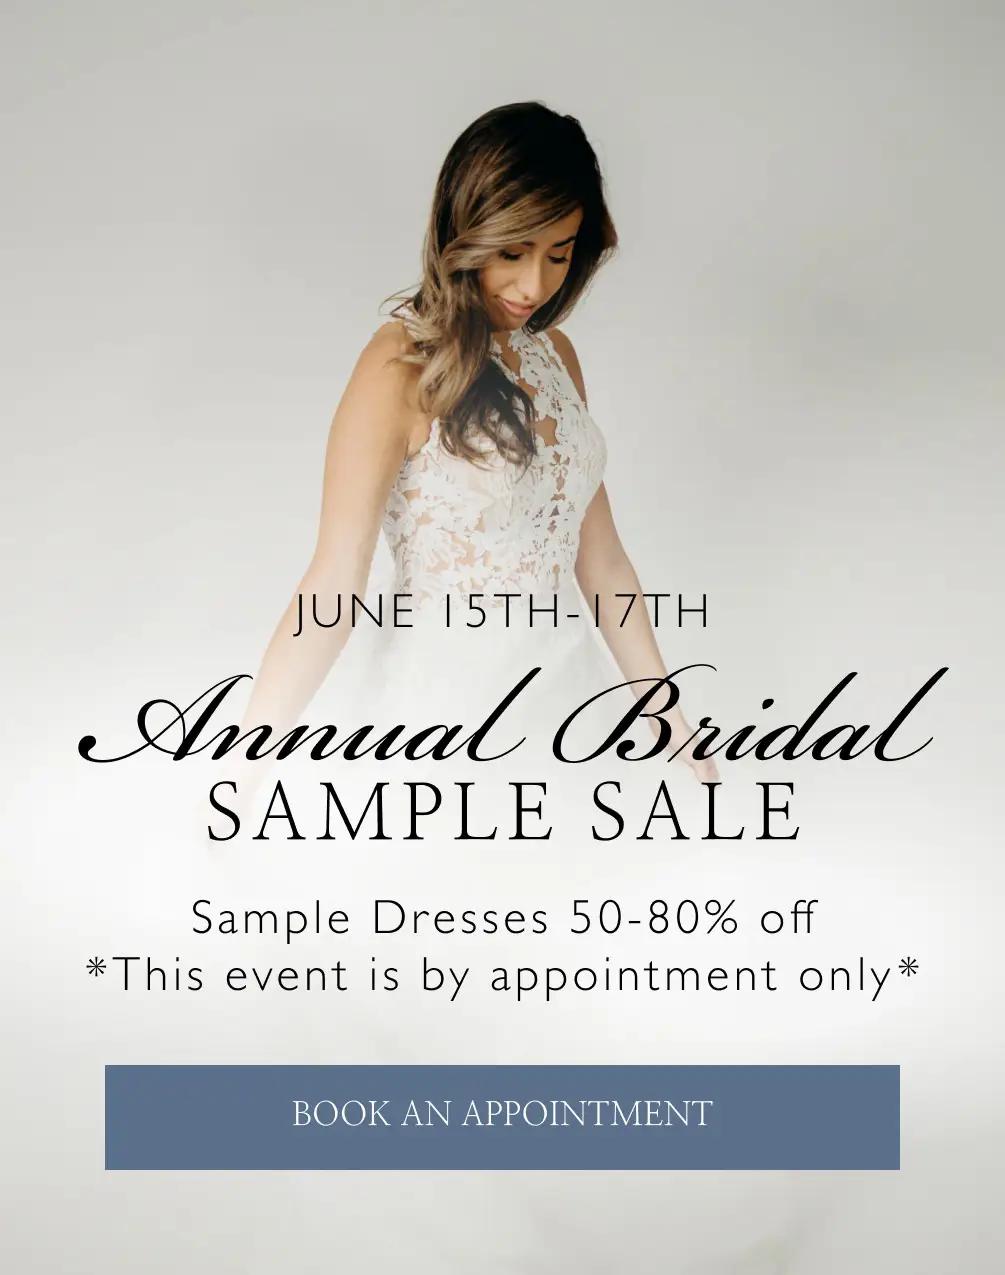 Annual Bridal Sample Sale at The Something Blue Shoppe